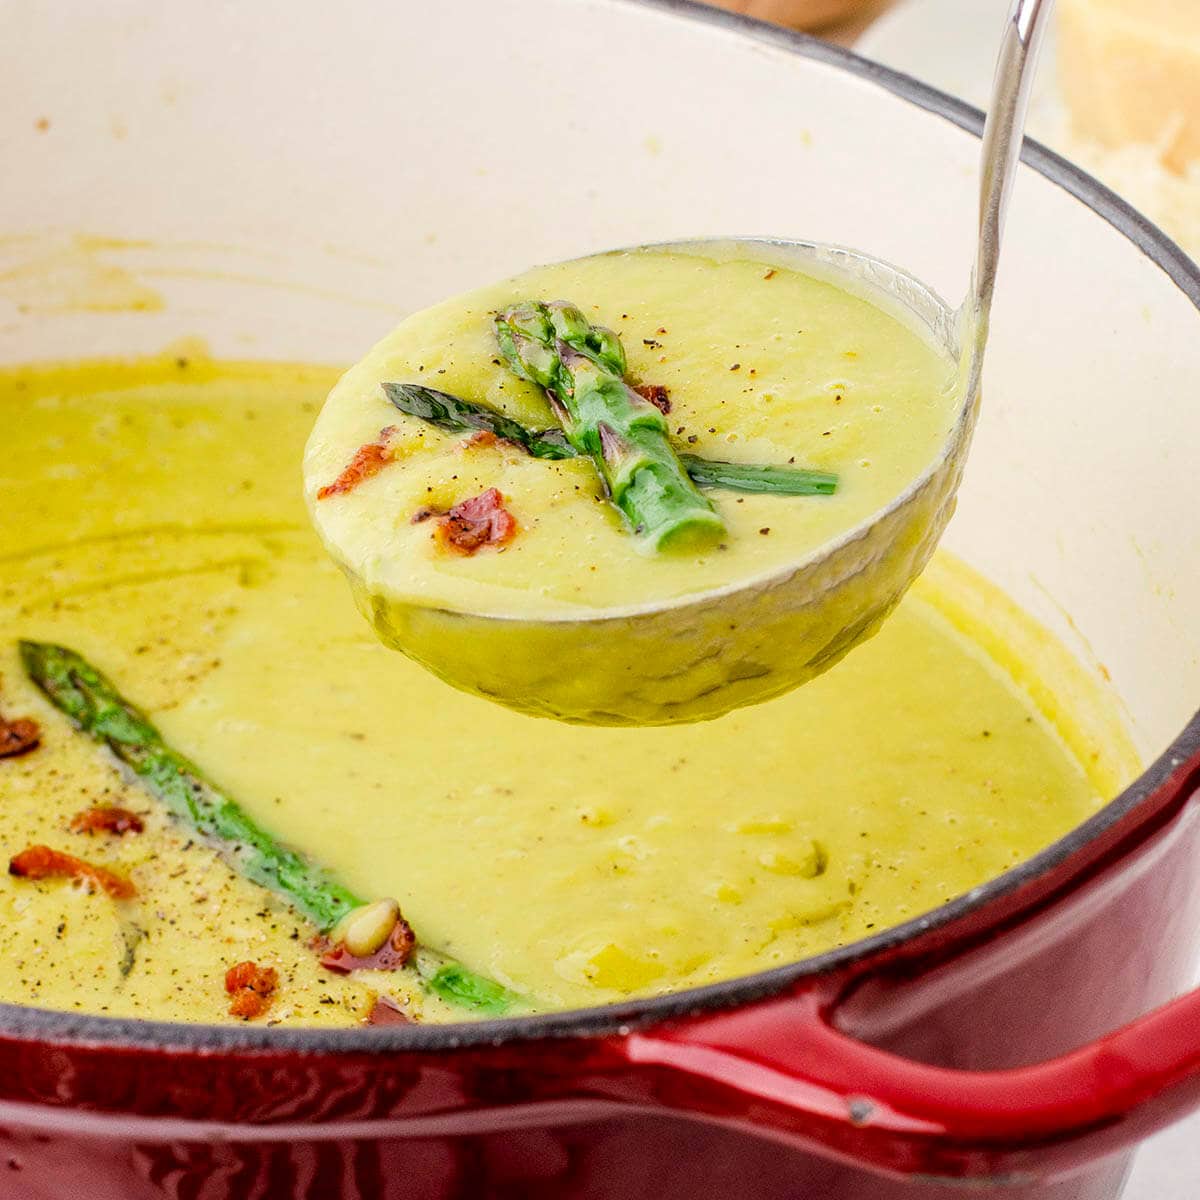 Stockpot filled with asparagus soup, with ladle scooping out a serving.